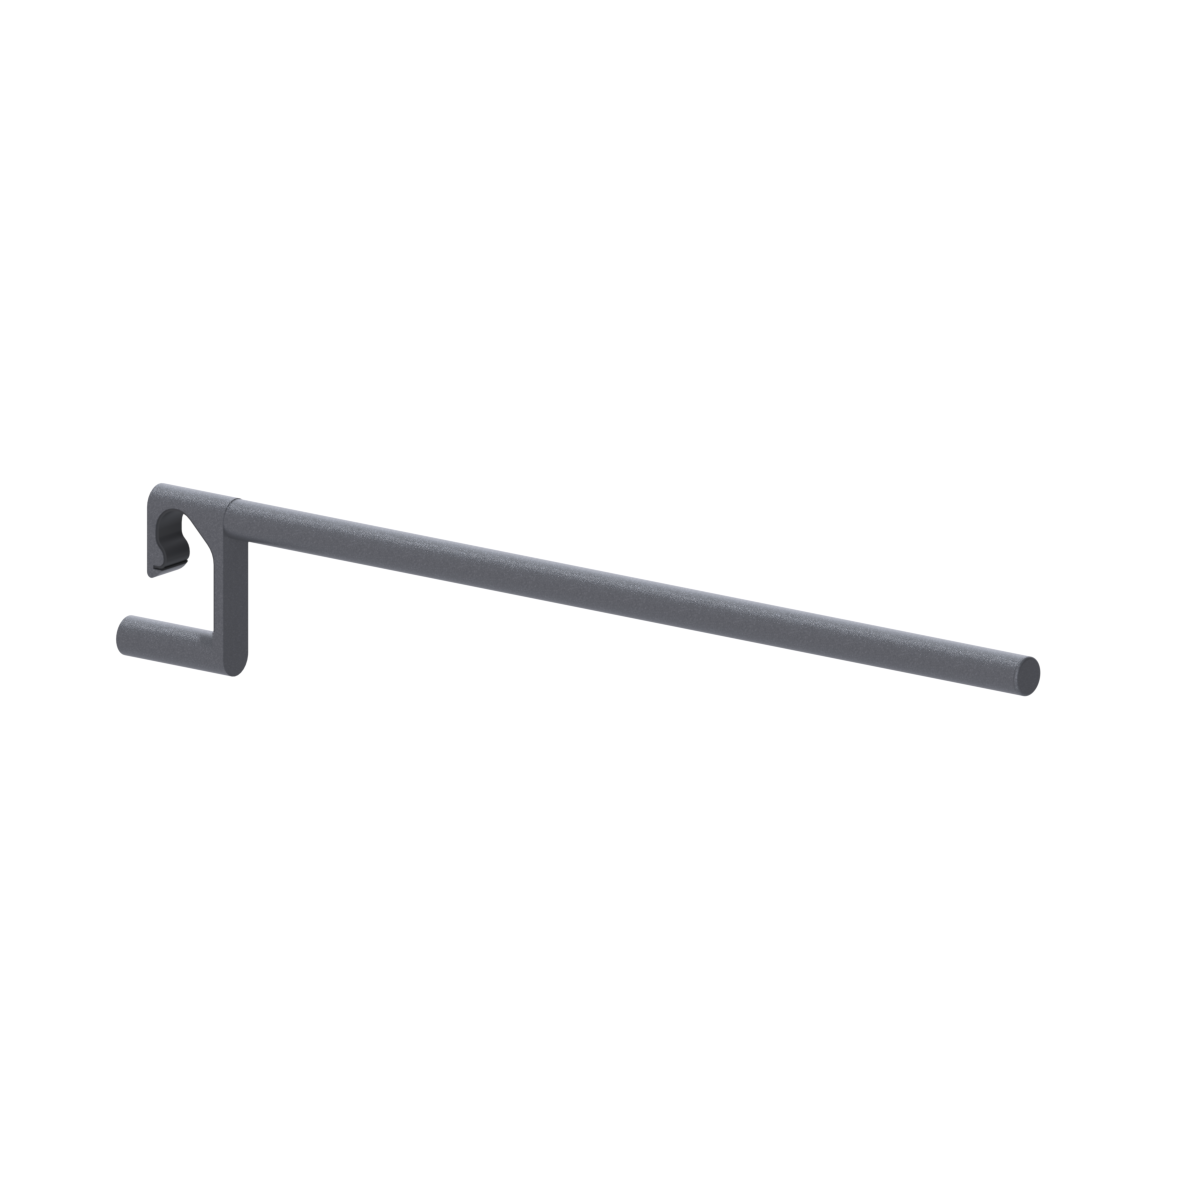 Nylon Care 400 Shower guard rail, for hanging in, L = 845 mm, Cavere Metallic anthracite